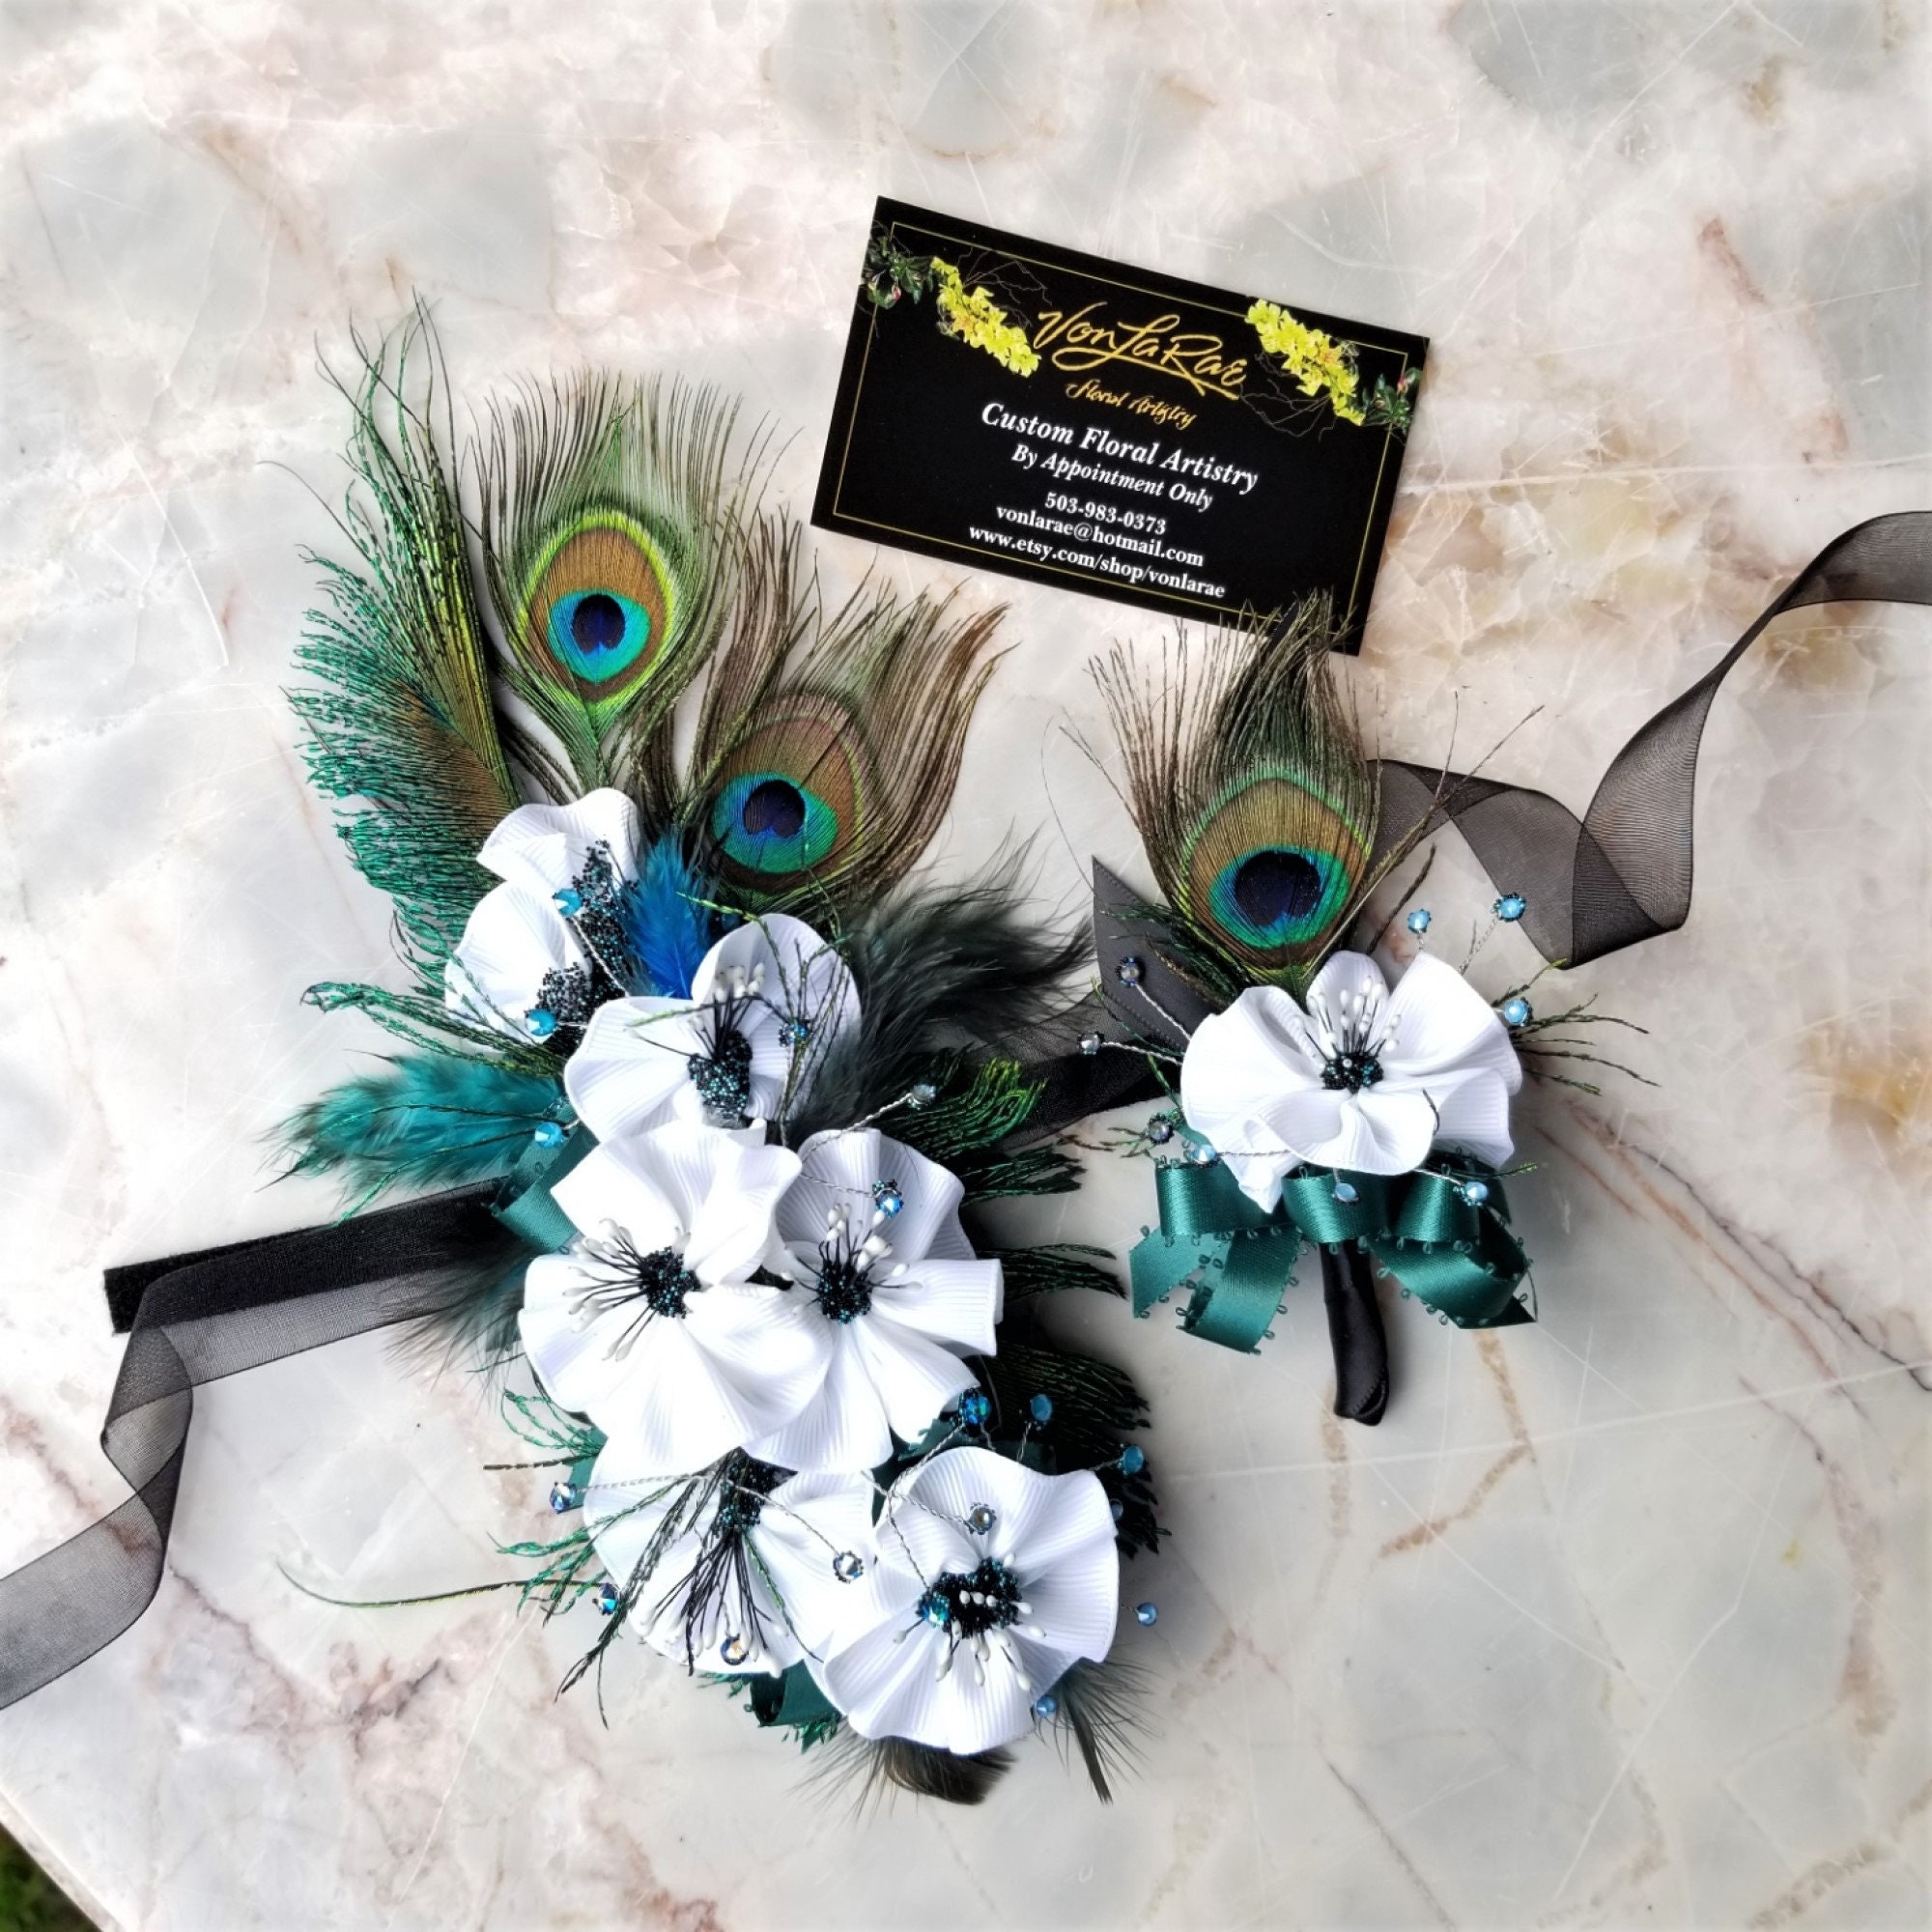 Custom Peacock Feathers Long Dramatic Wrist Corsage and Boutonniere Prom  Quinceanera Wedding Event Flowers Glam Bling Swarovski 